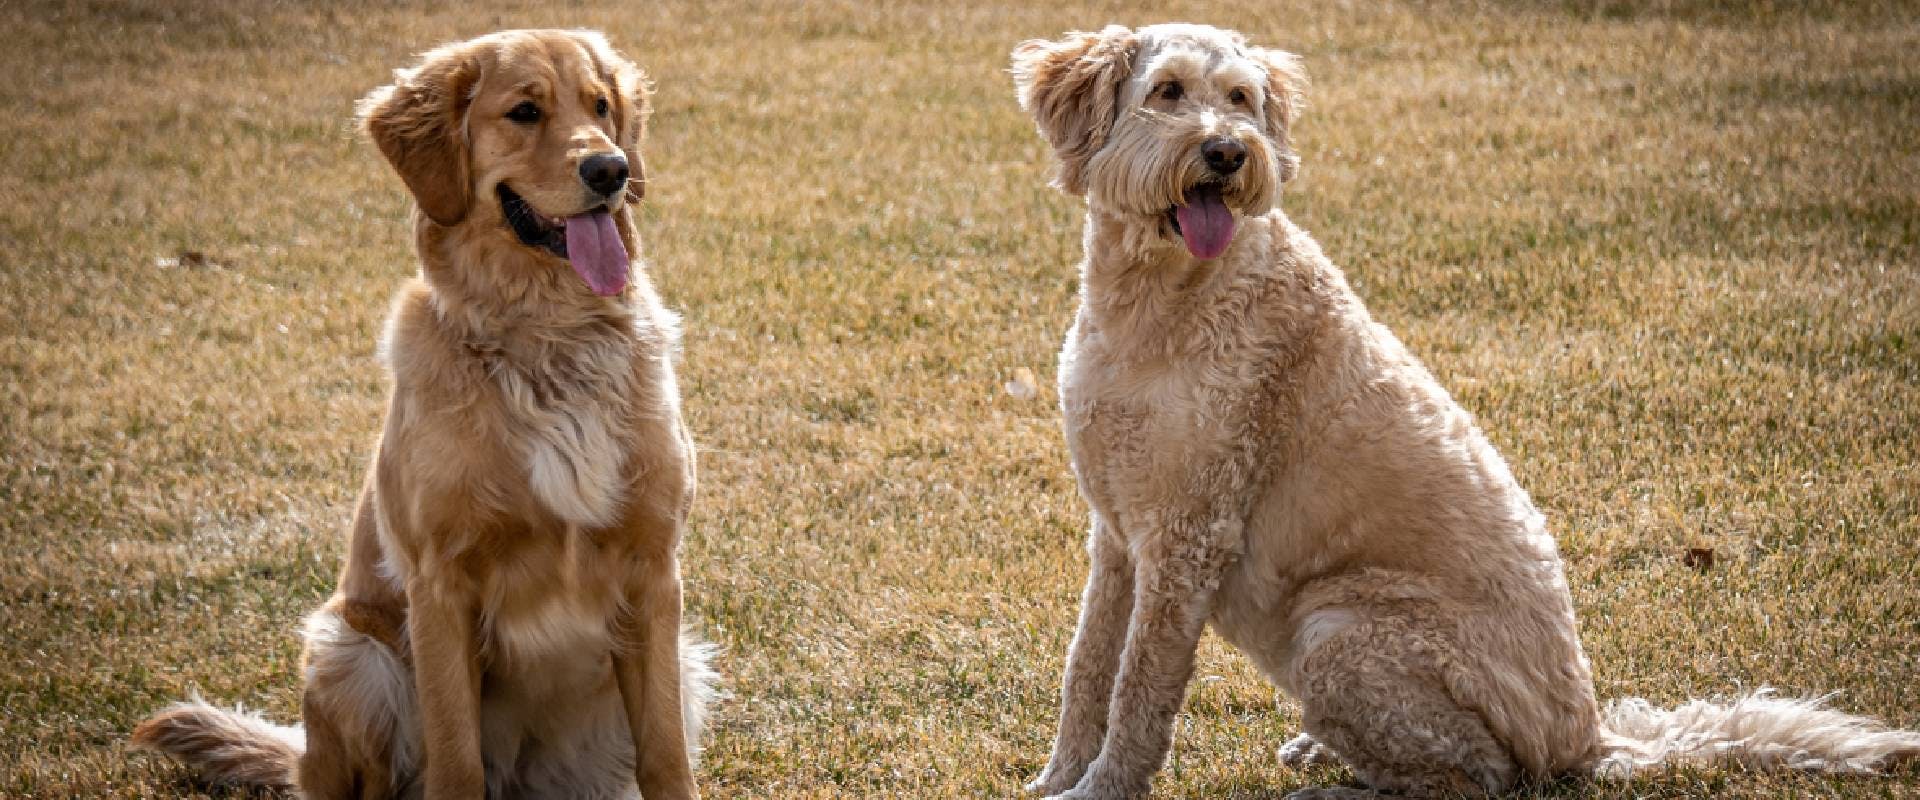 Golden Retriever and Goldendoodle sat in a field